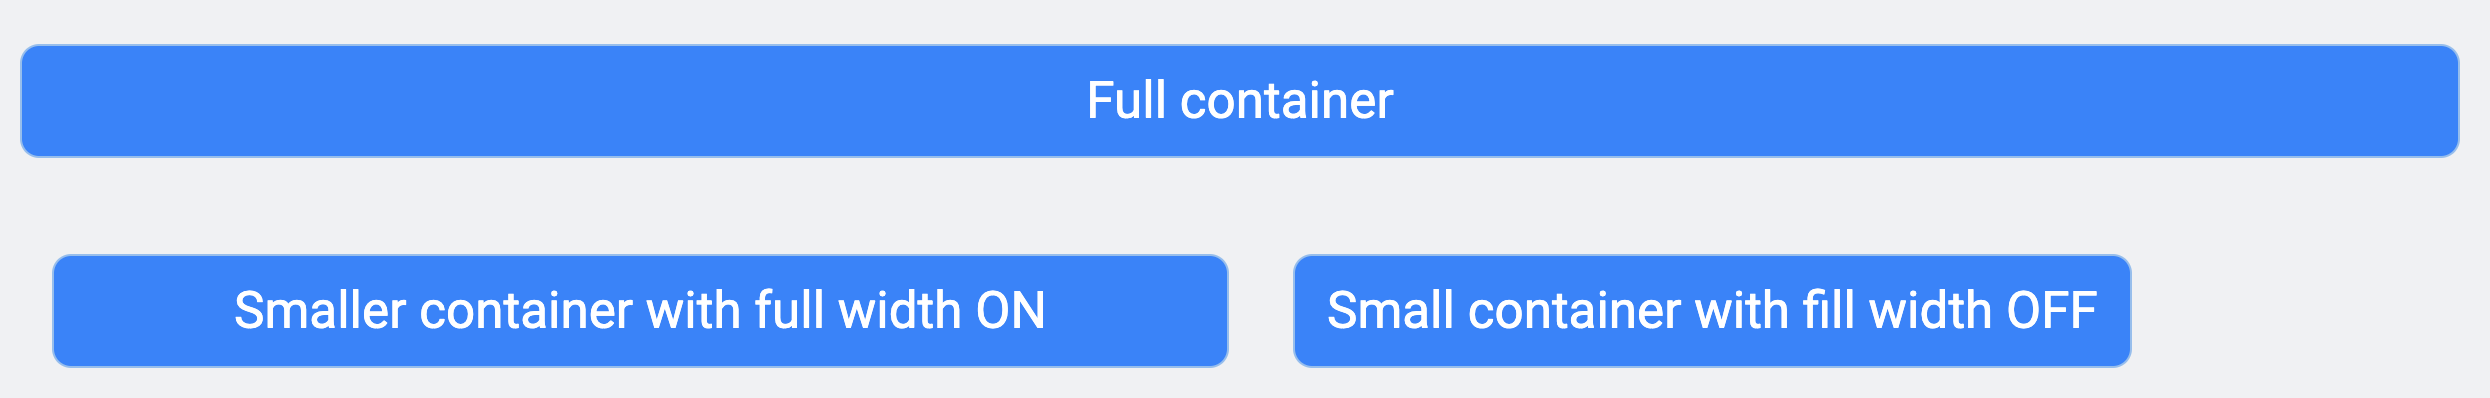 Image showing full width in different sizes of containers